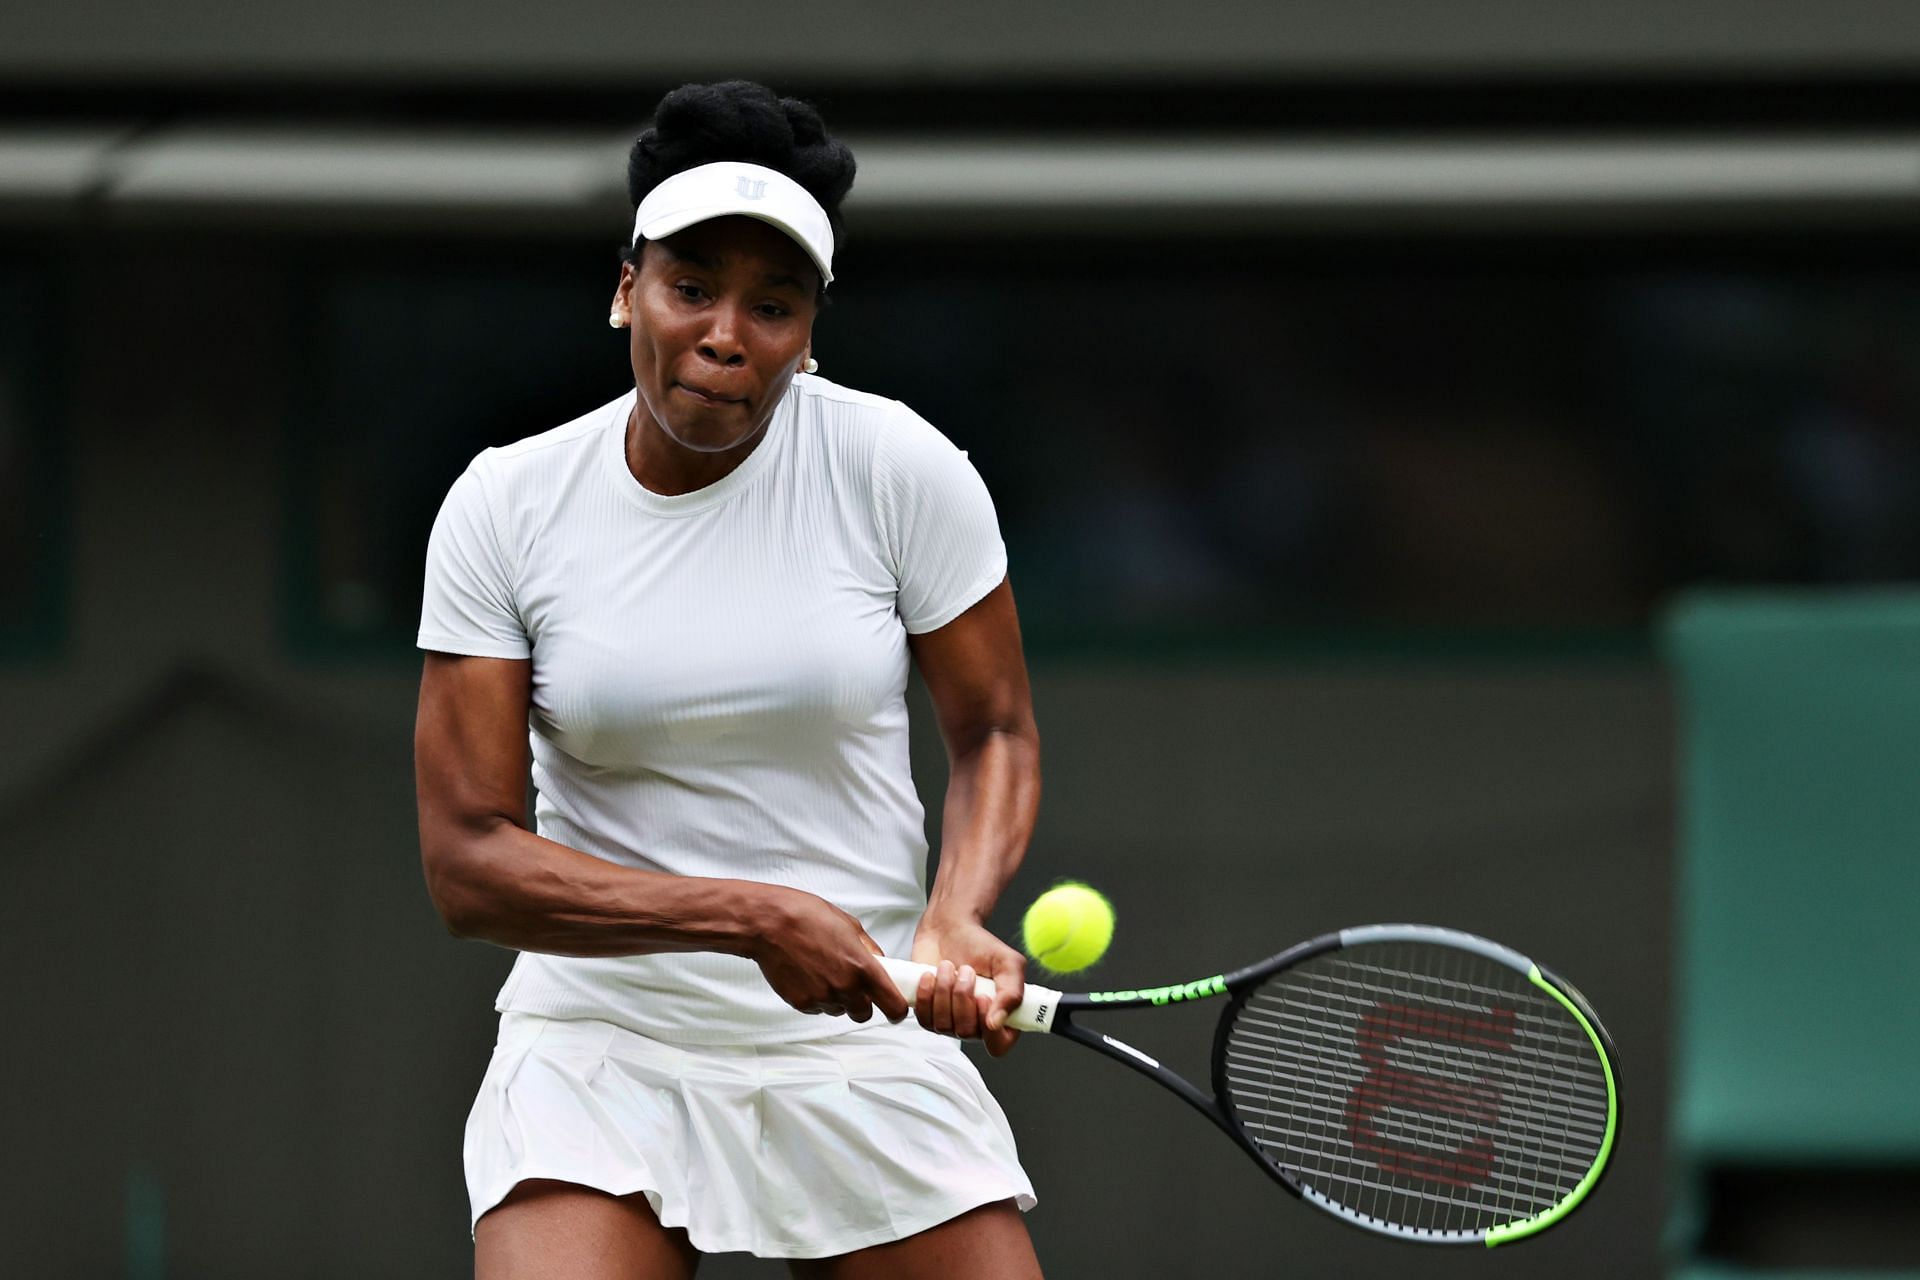 Venus Williams last played a match in August 2021